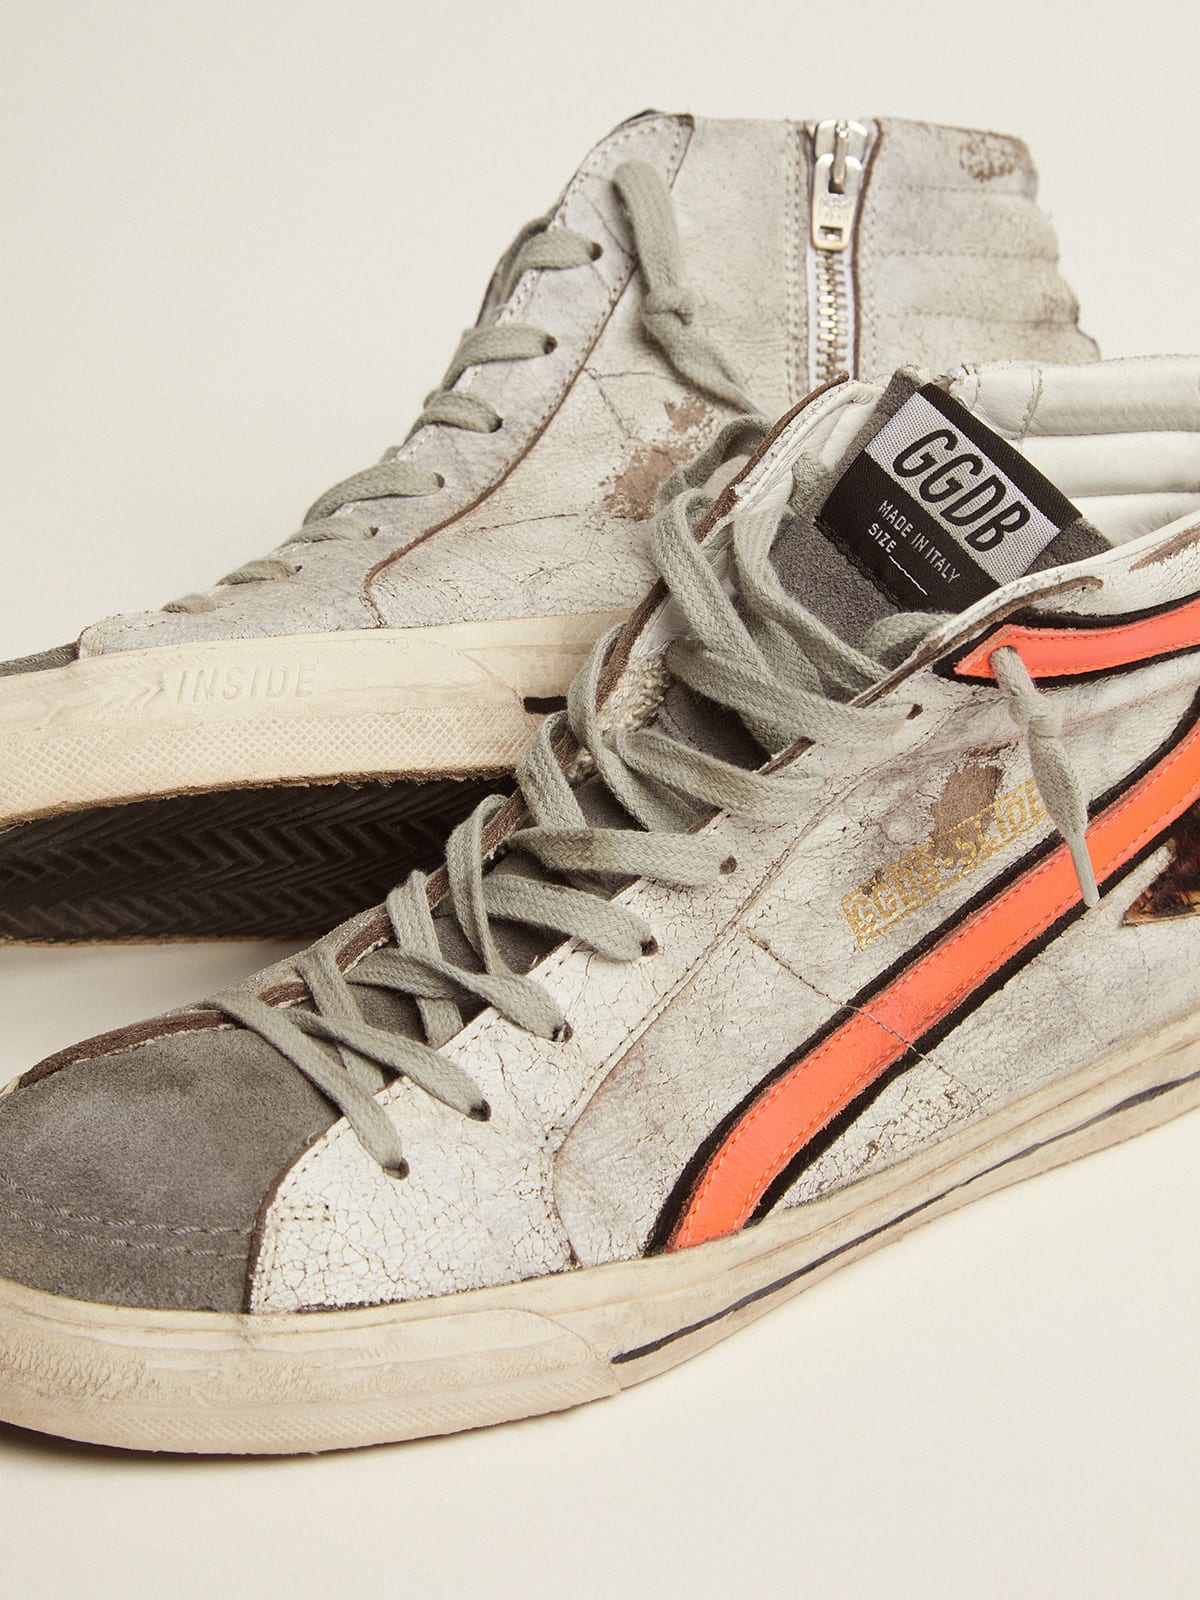 Golden Goose - Slide sneakers in crackled suede with leopard-print pony skin star in 